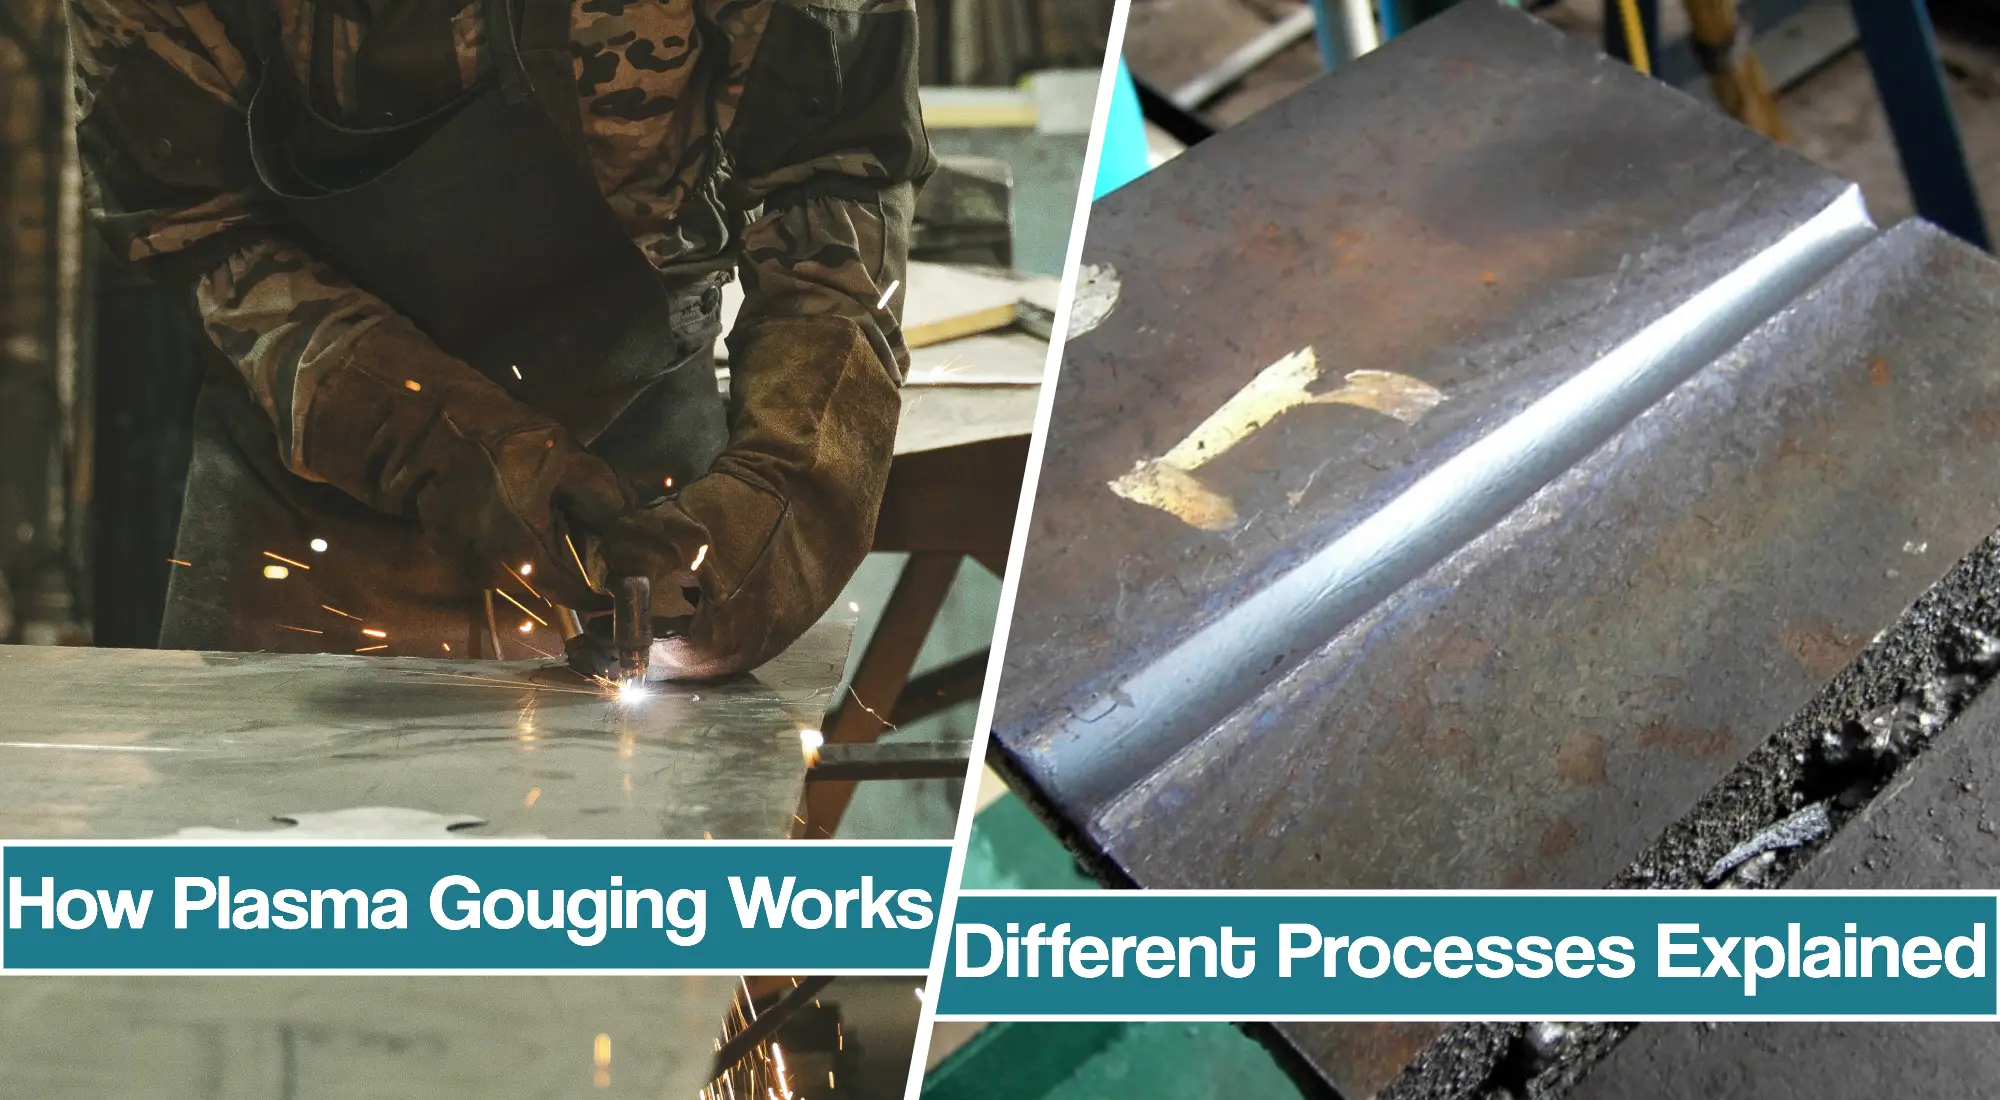 How Plasma Gouging Works and Different Processes Explained